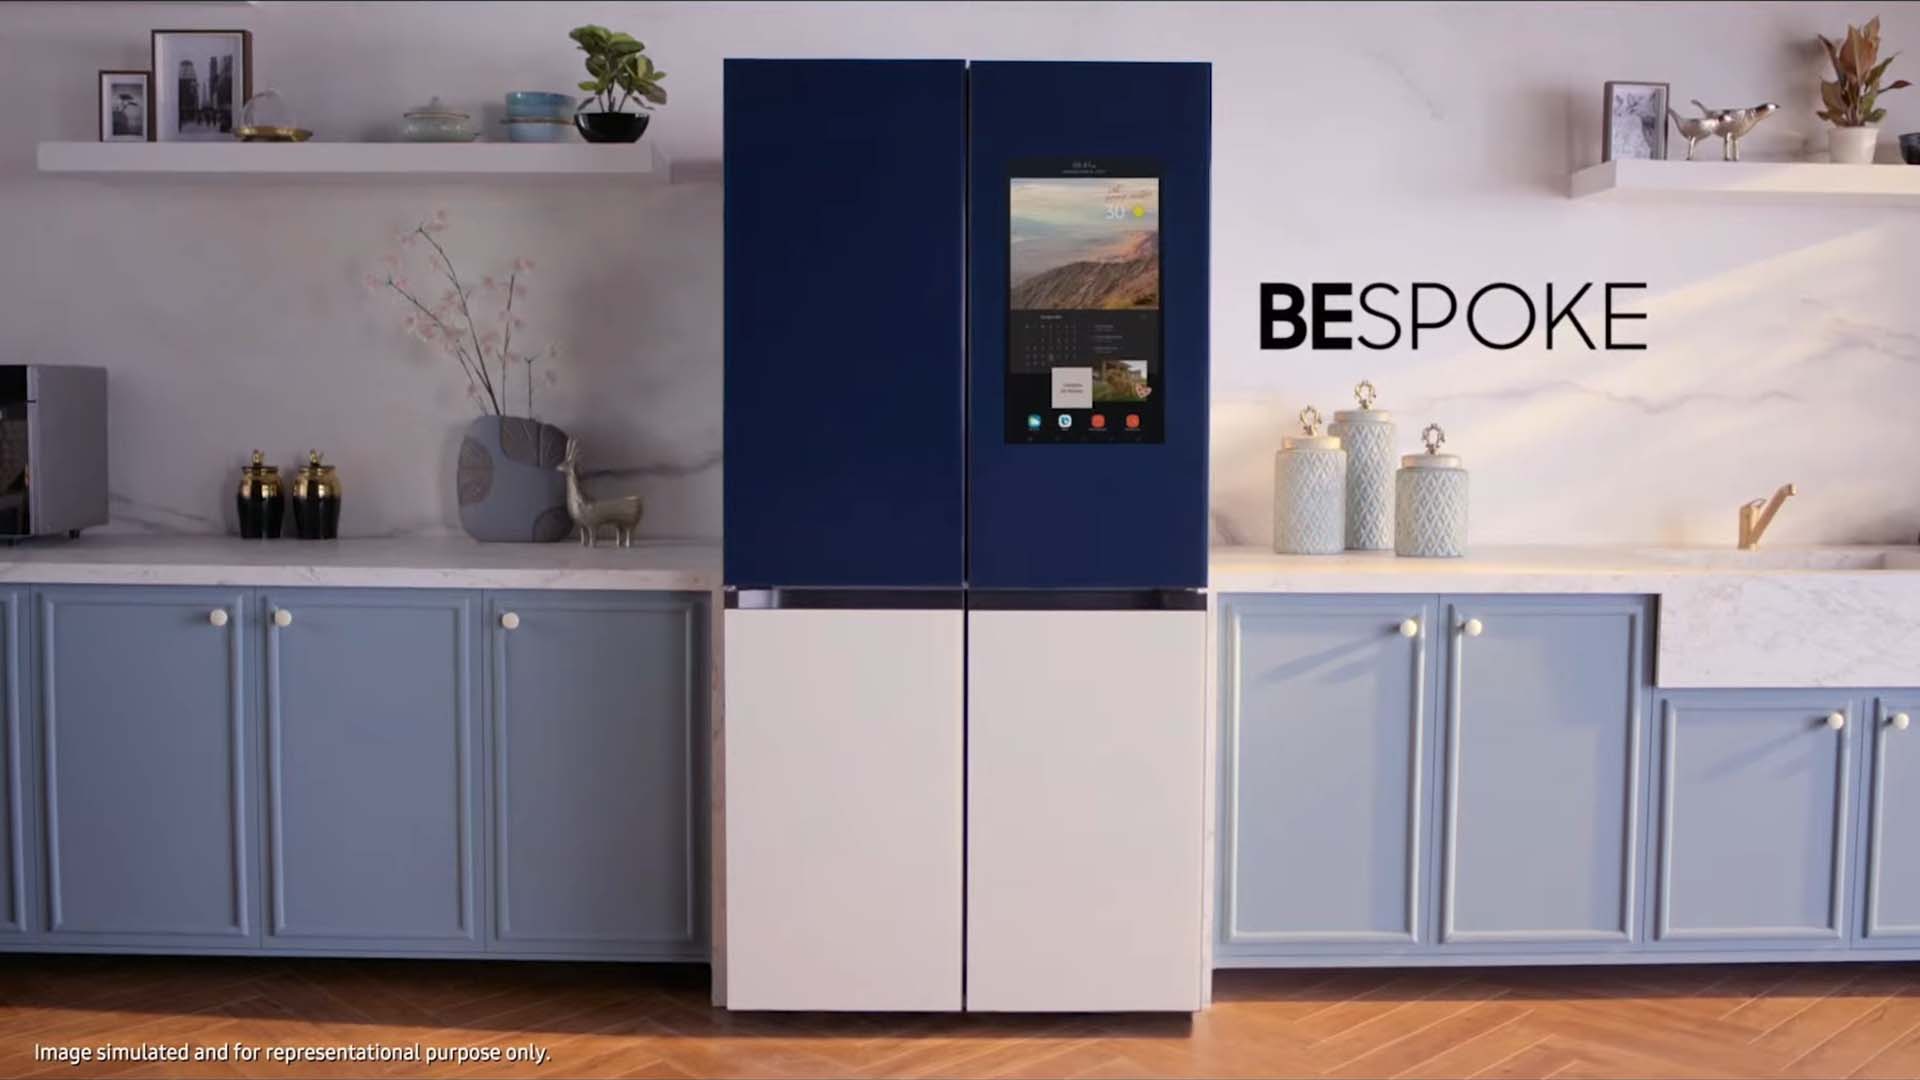 samsung-launches-bespoke-refrigerator-lineup-in-india-sammobile